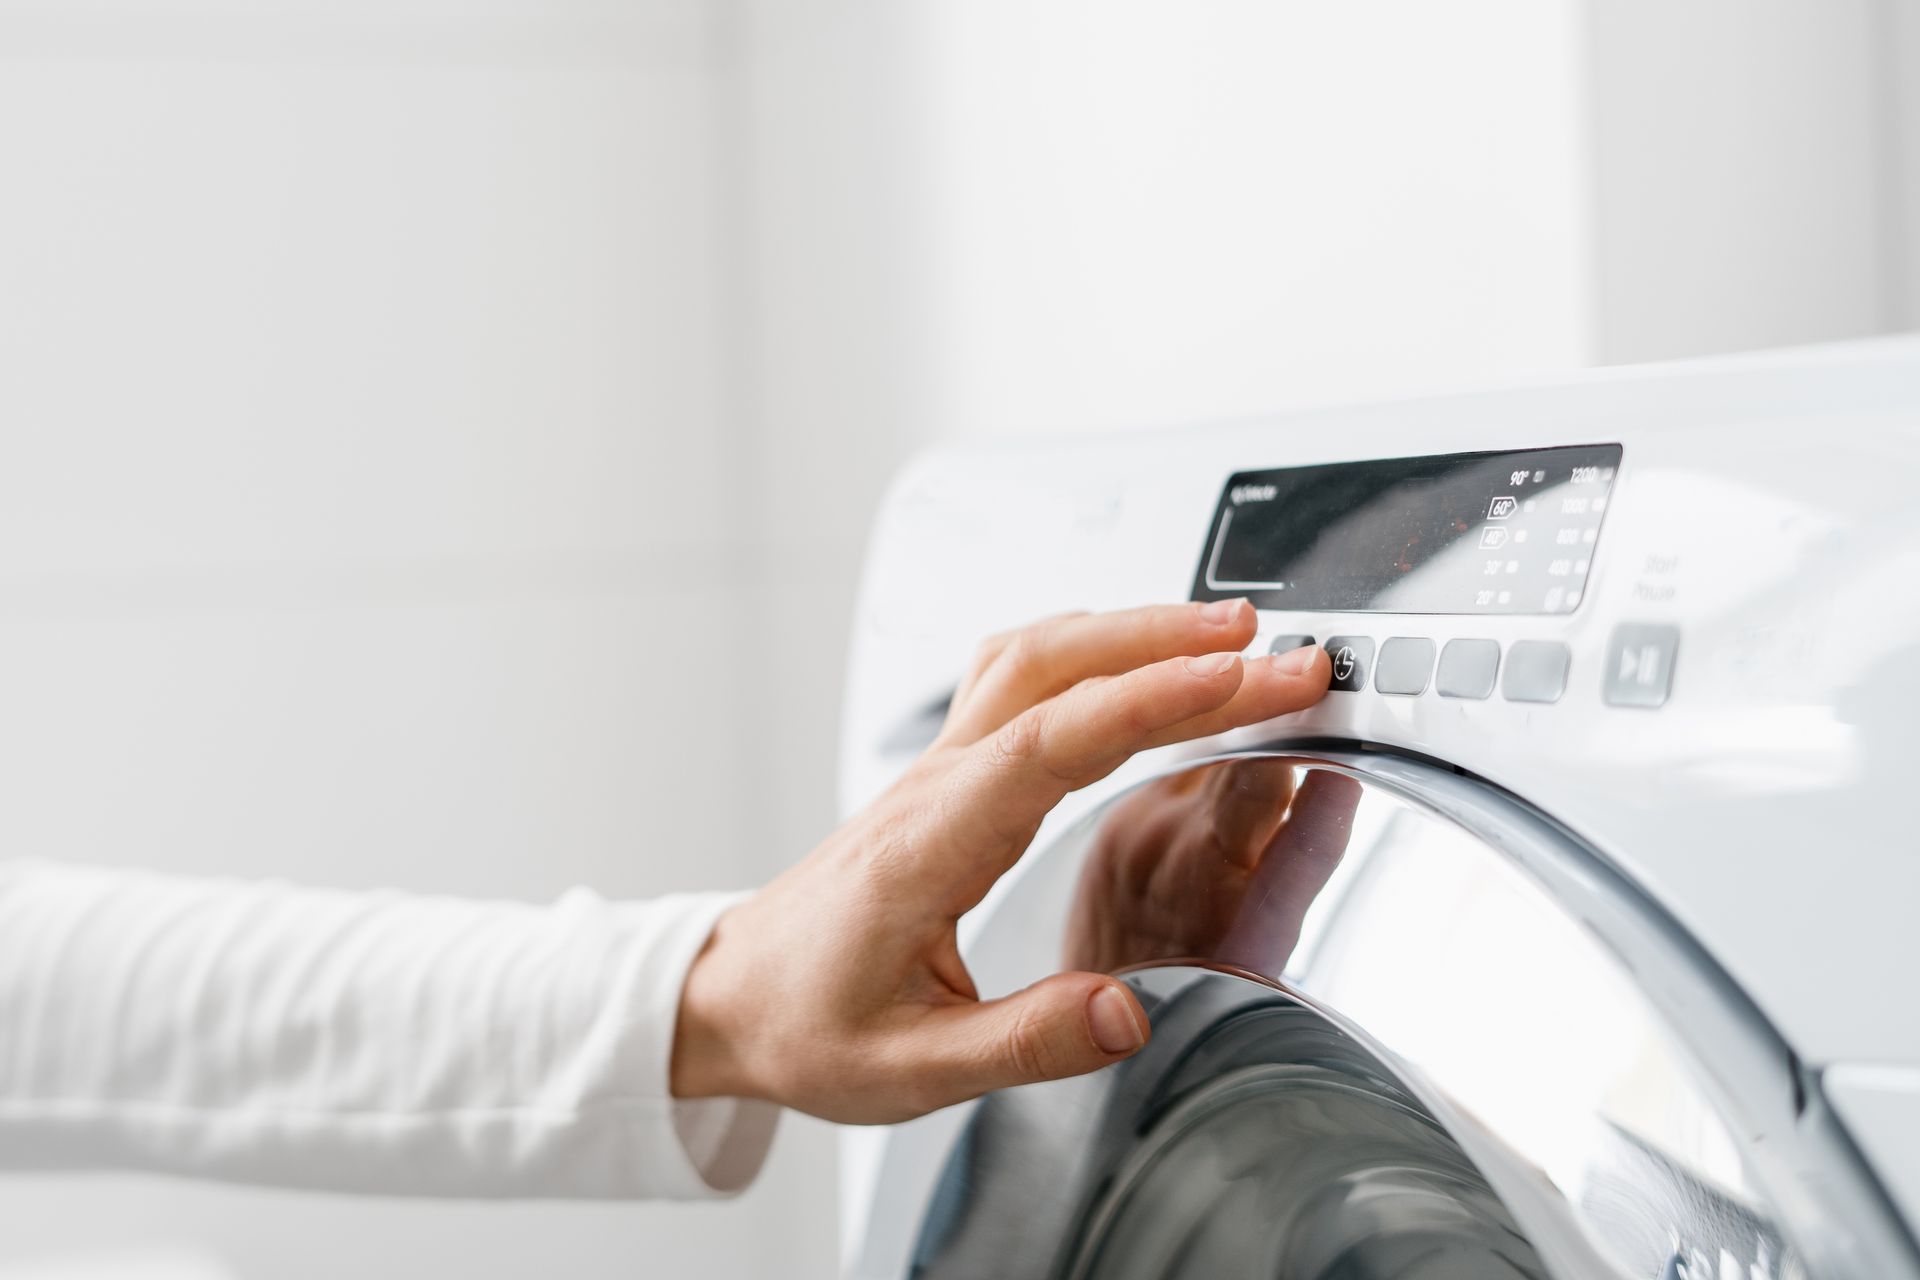 A person is pressing a button on a washing machine.